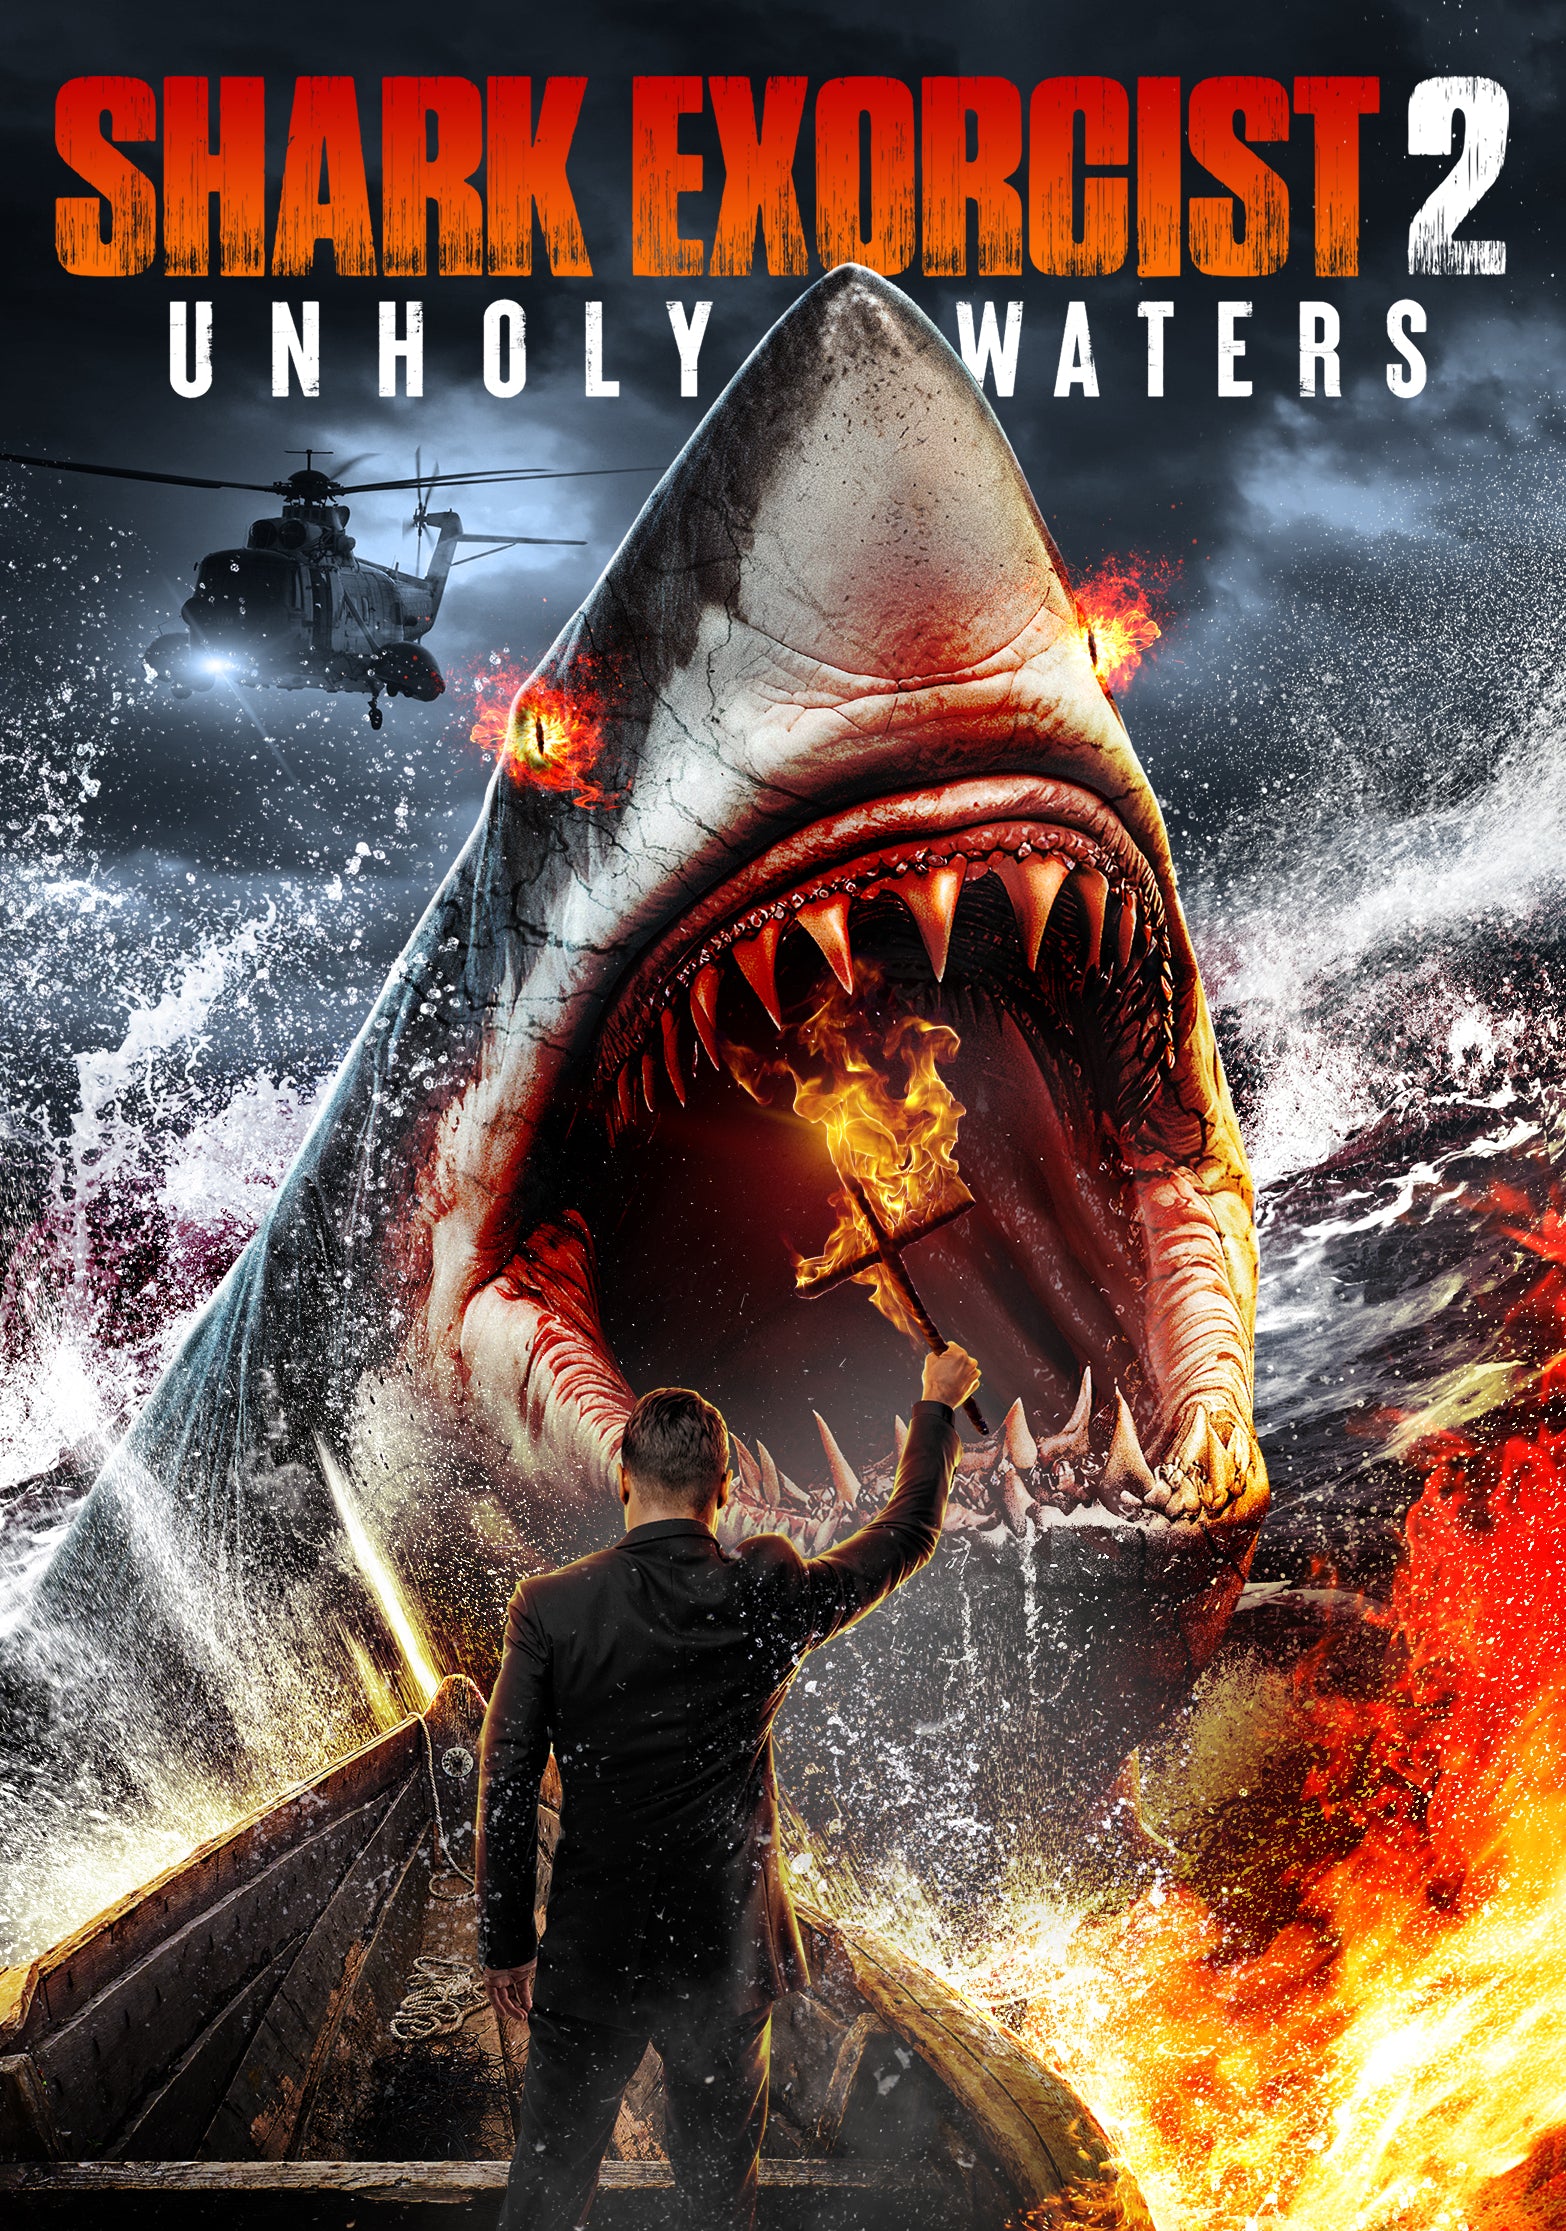 SHARK EXORCIST 2: UNHOLY WATERS DVD [PRE-ORDER]